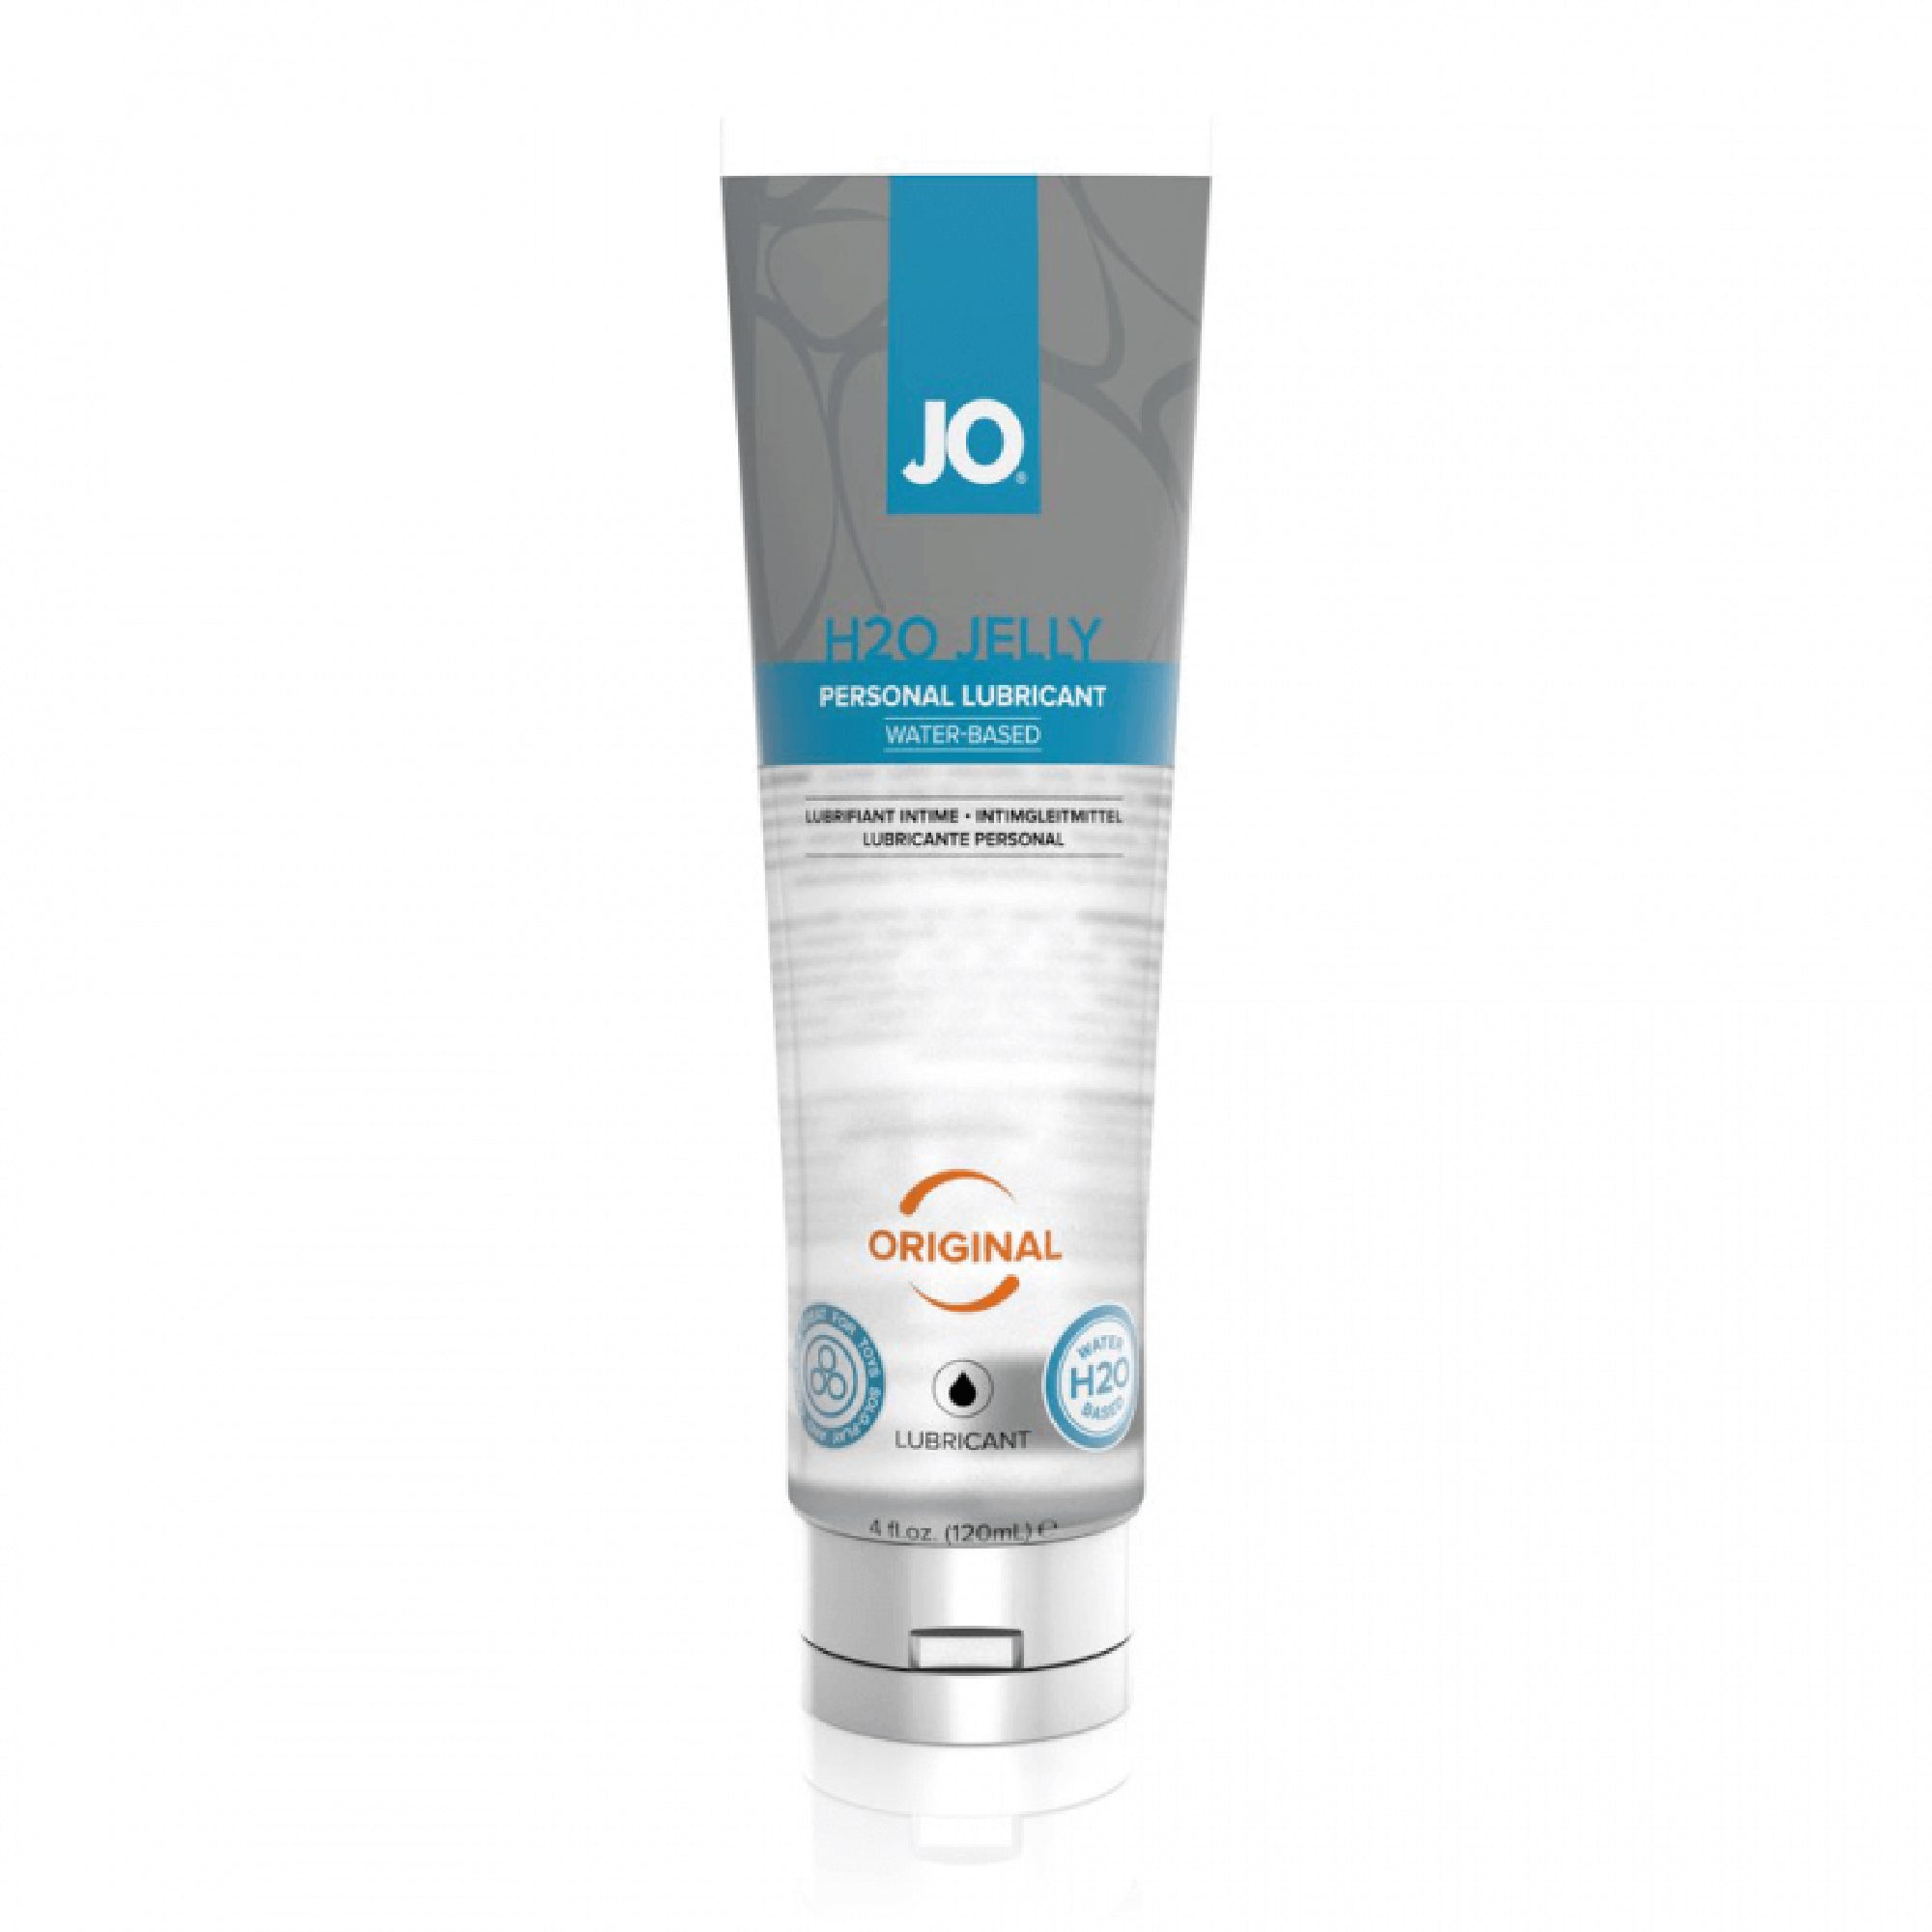 Shop the Original Water Based JO H2O Jelly Lubricant 4 floz / 120 ml